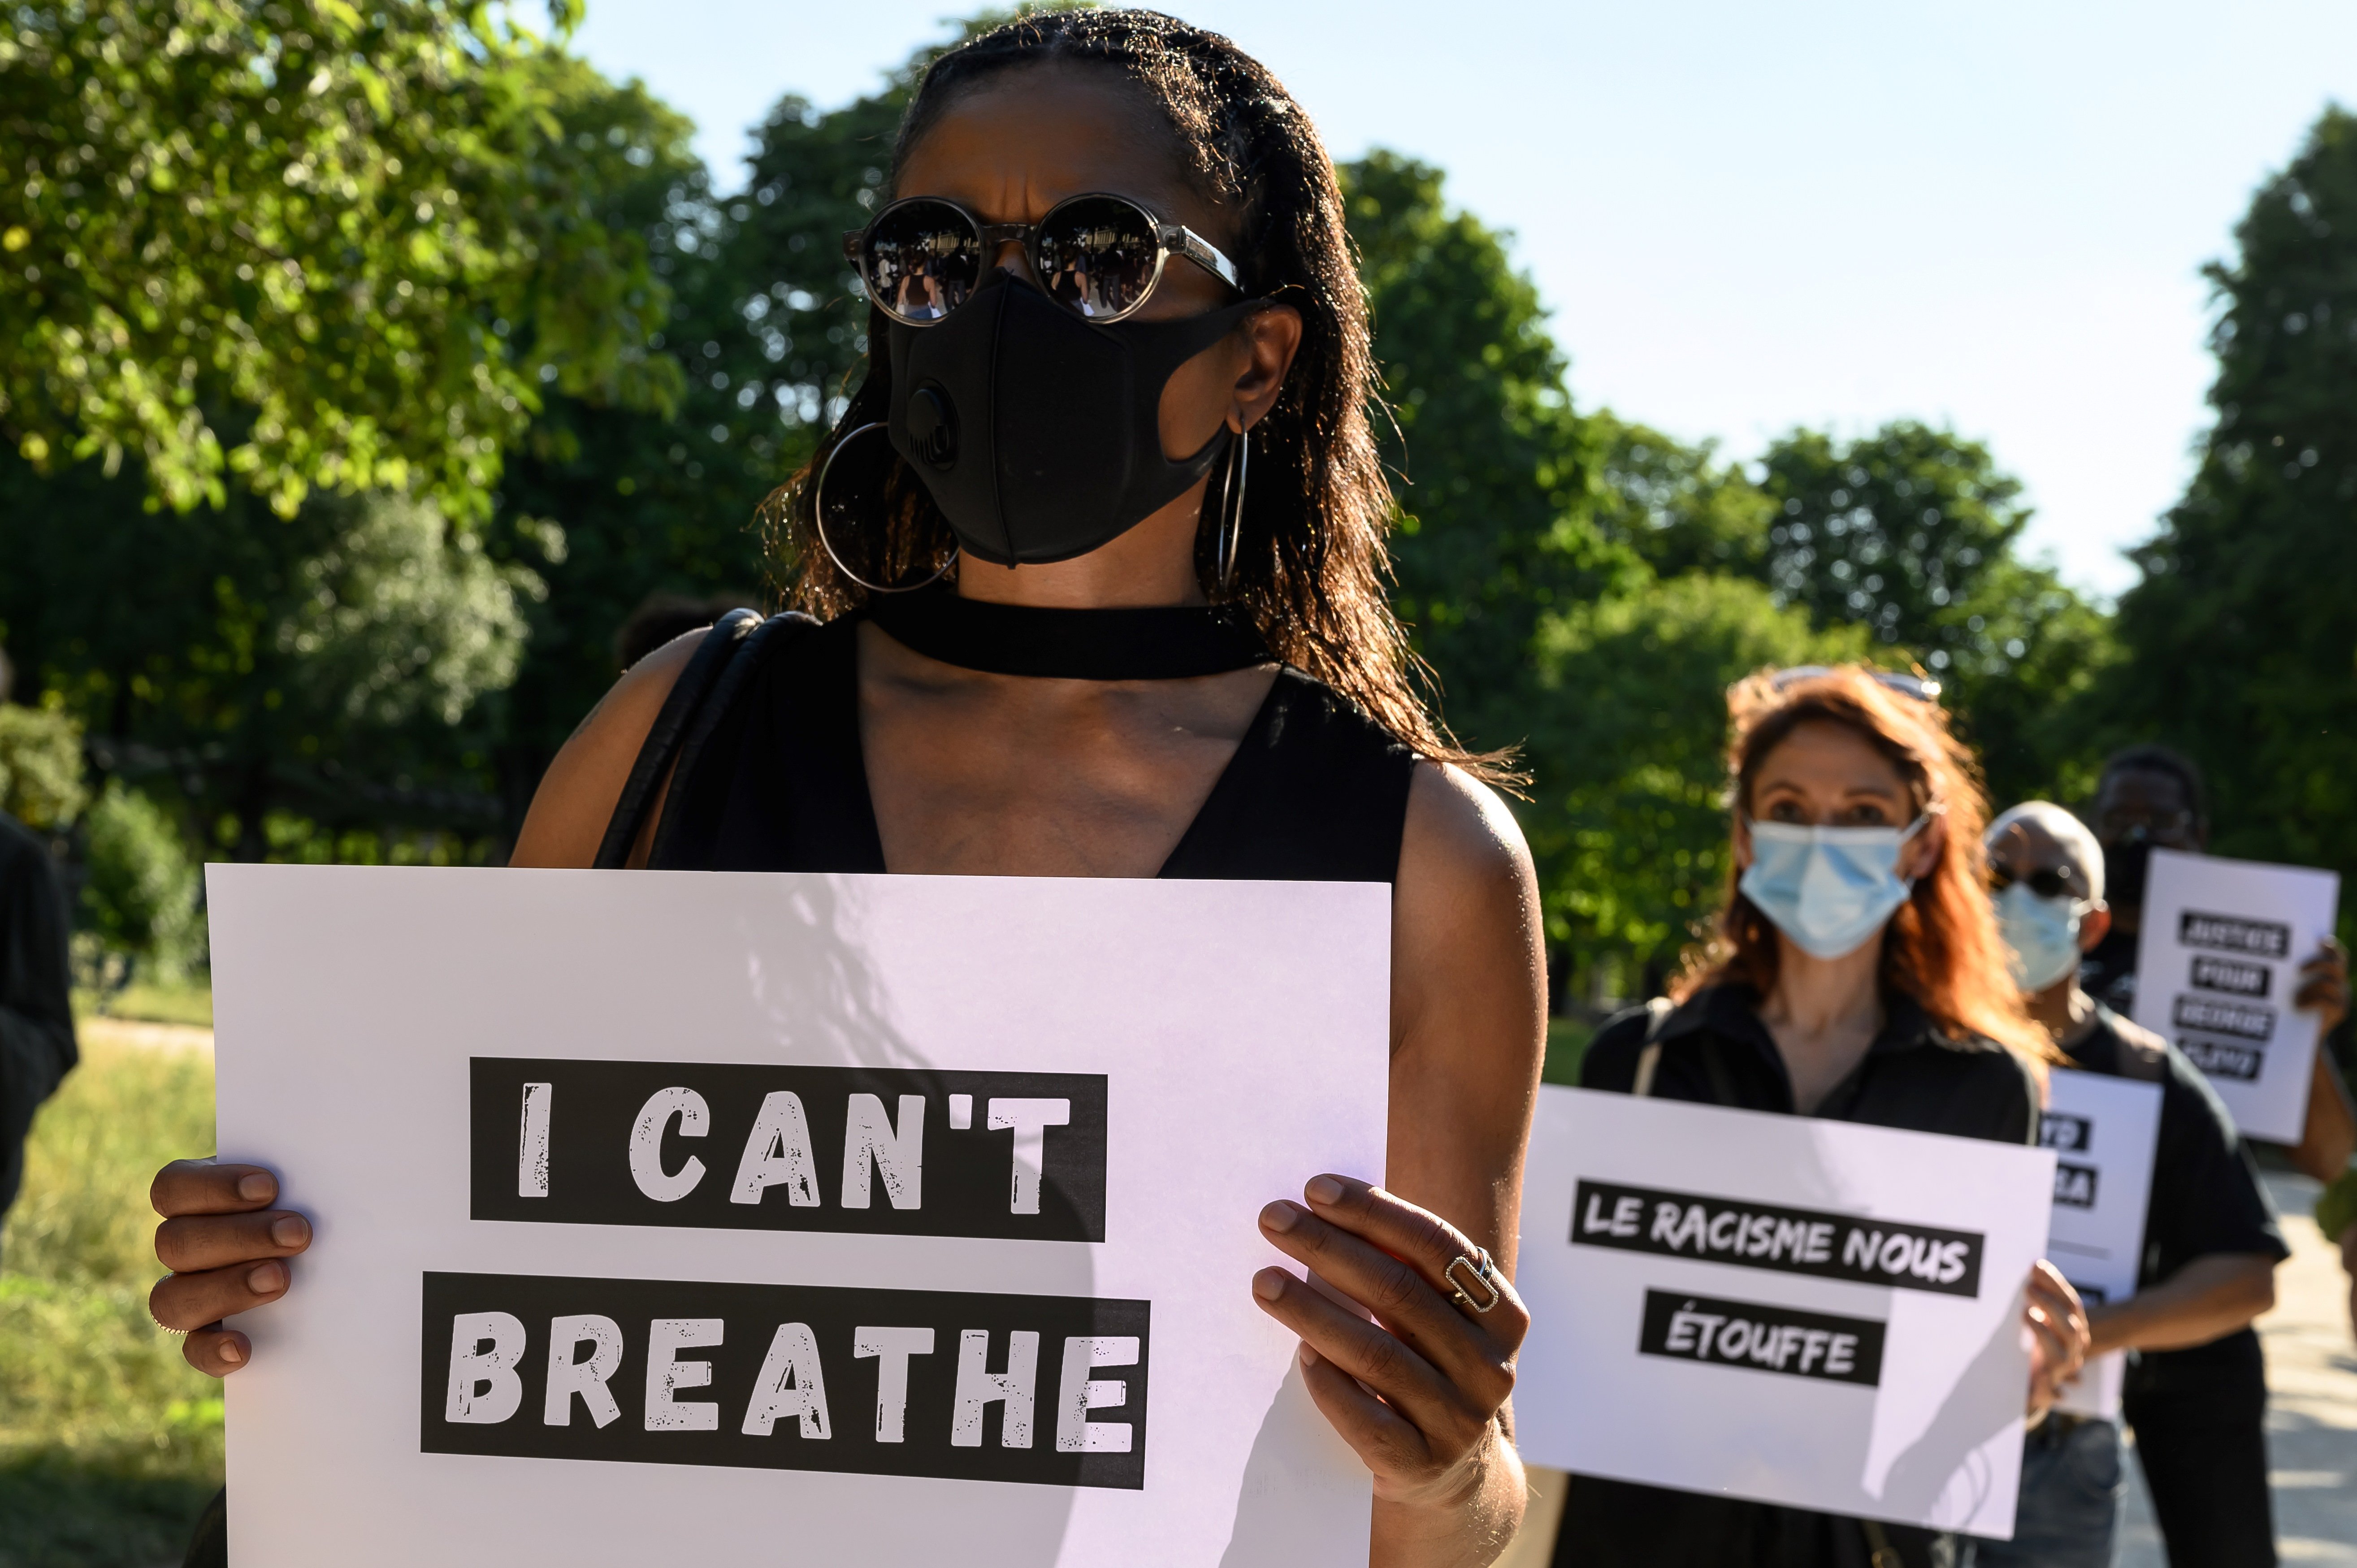 Protesters demonstrate outside the United States Embassy in Paris on June 1, 2020, after the police killing of unarmed black man George Floyd in the USA. (Photo by BERTRAND GUAY/AFP via Getty Images)